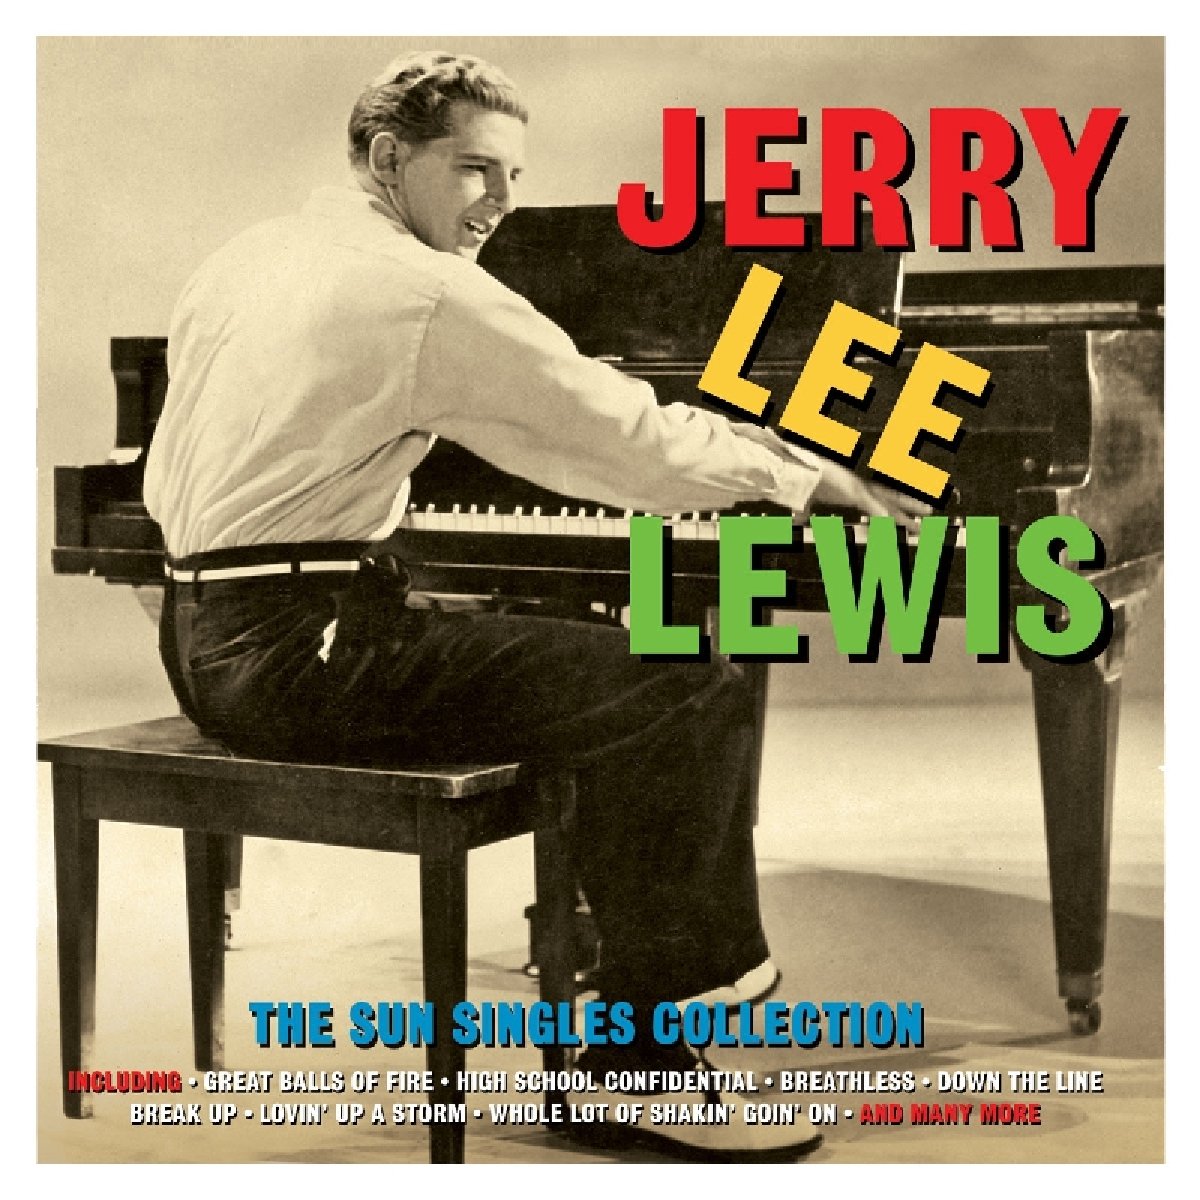 JERRY LEE LEWIS: The Sun Singles Collection (2 CDS)